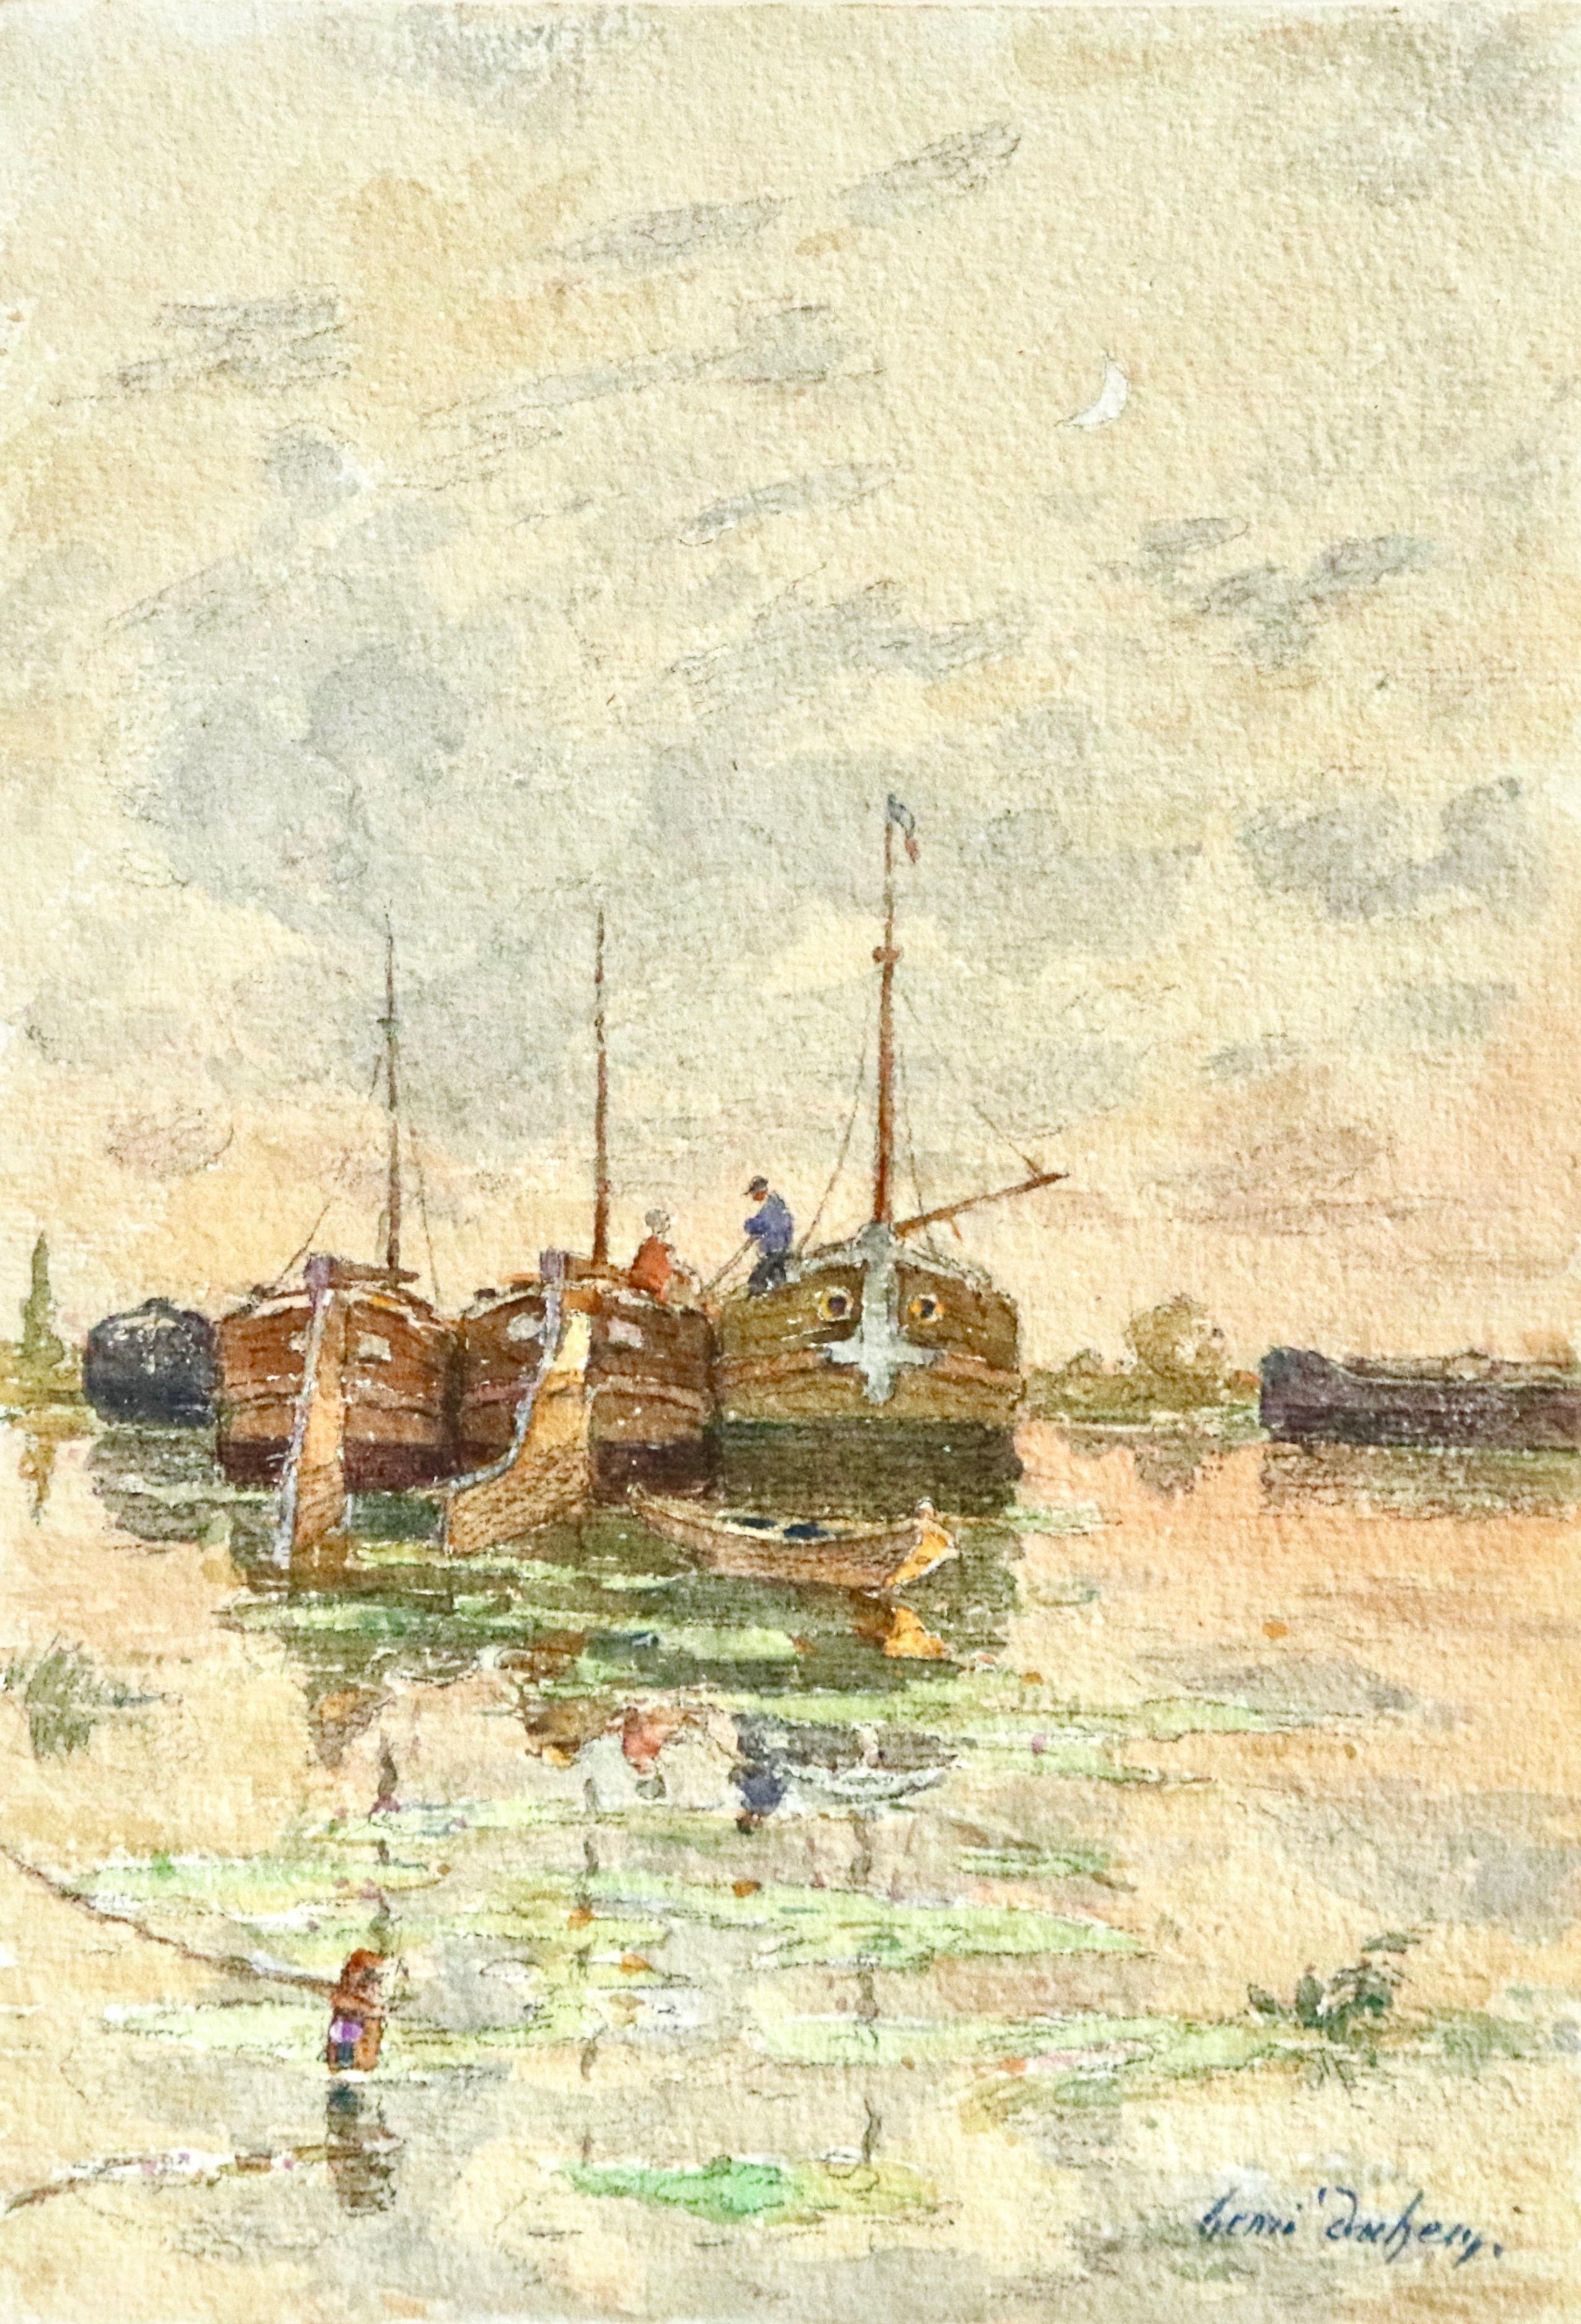 On the Barges - 19th Century Watercolor, Figures on Boats on River - Henri Duhem